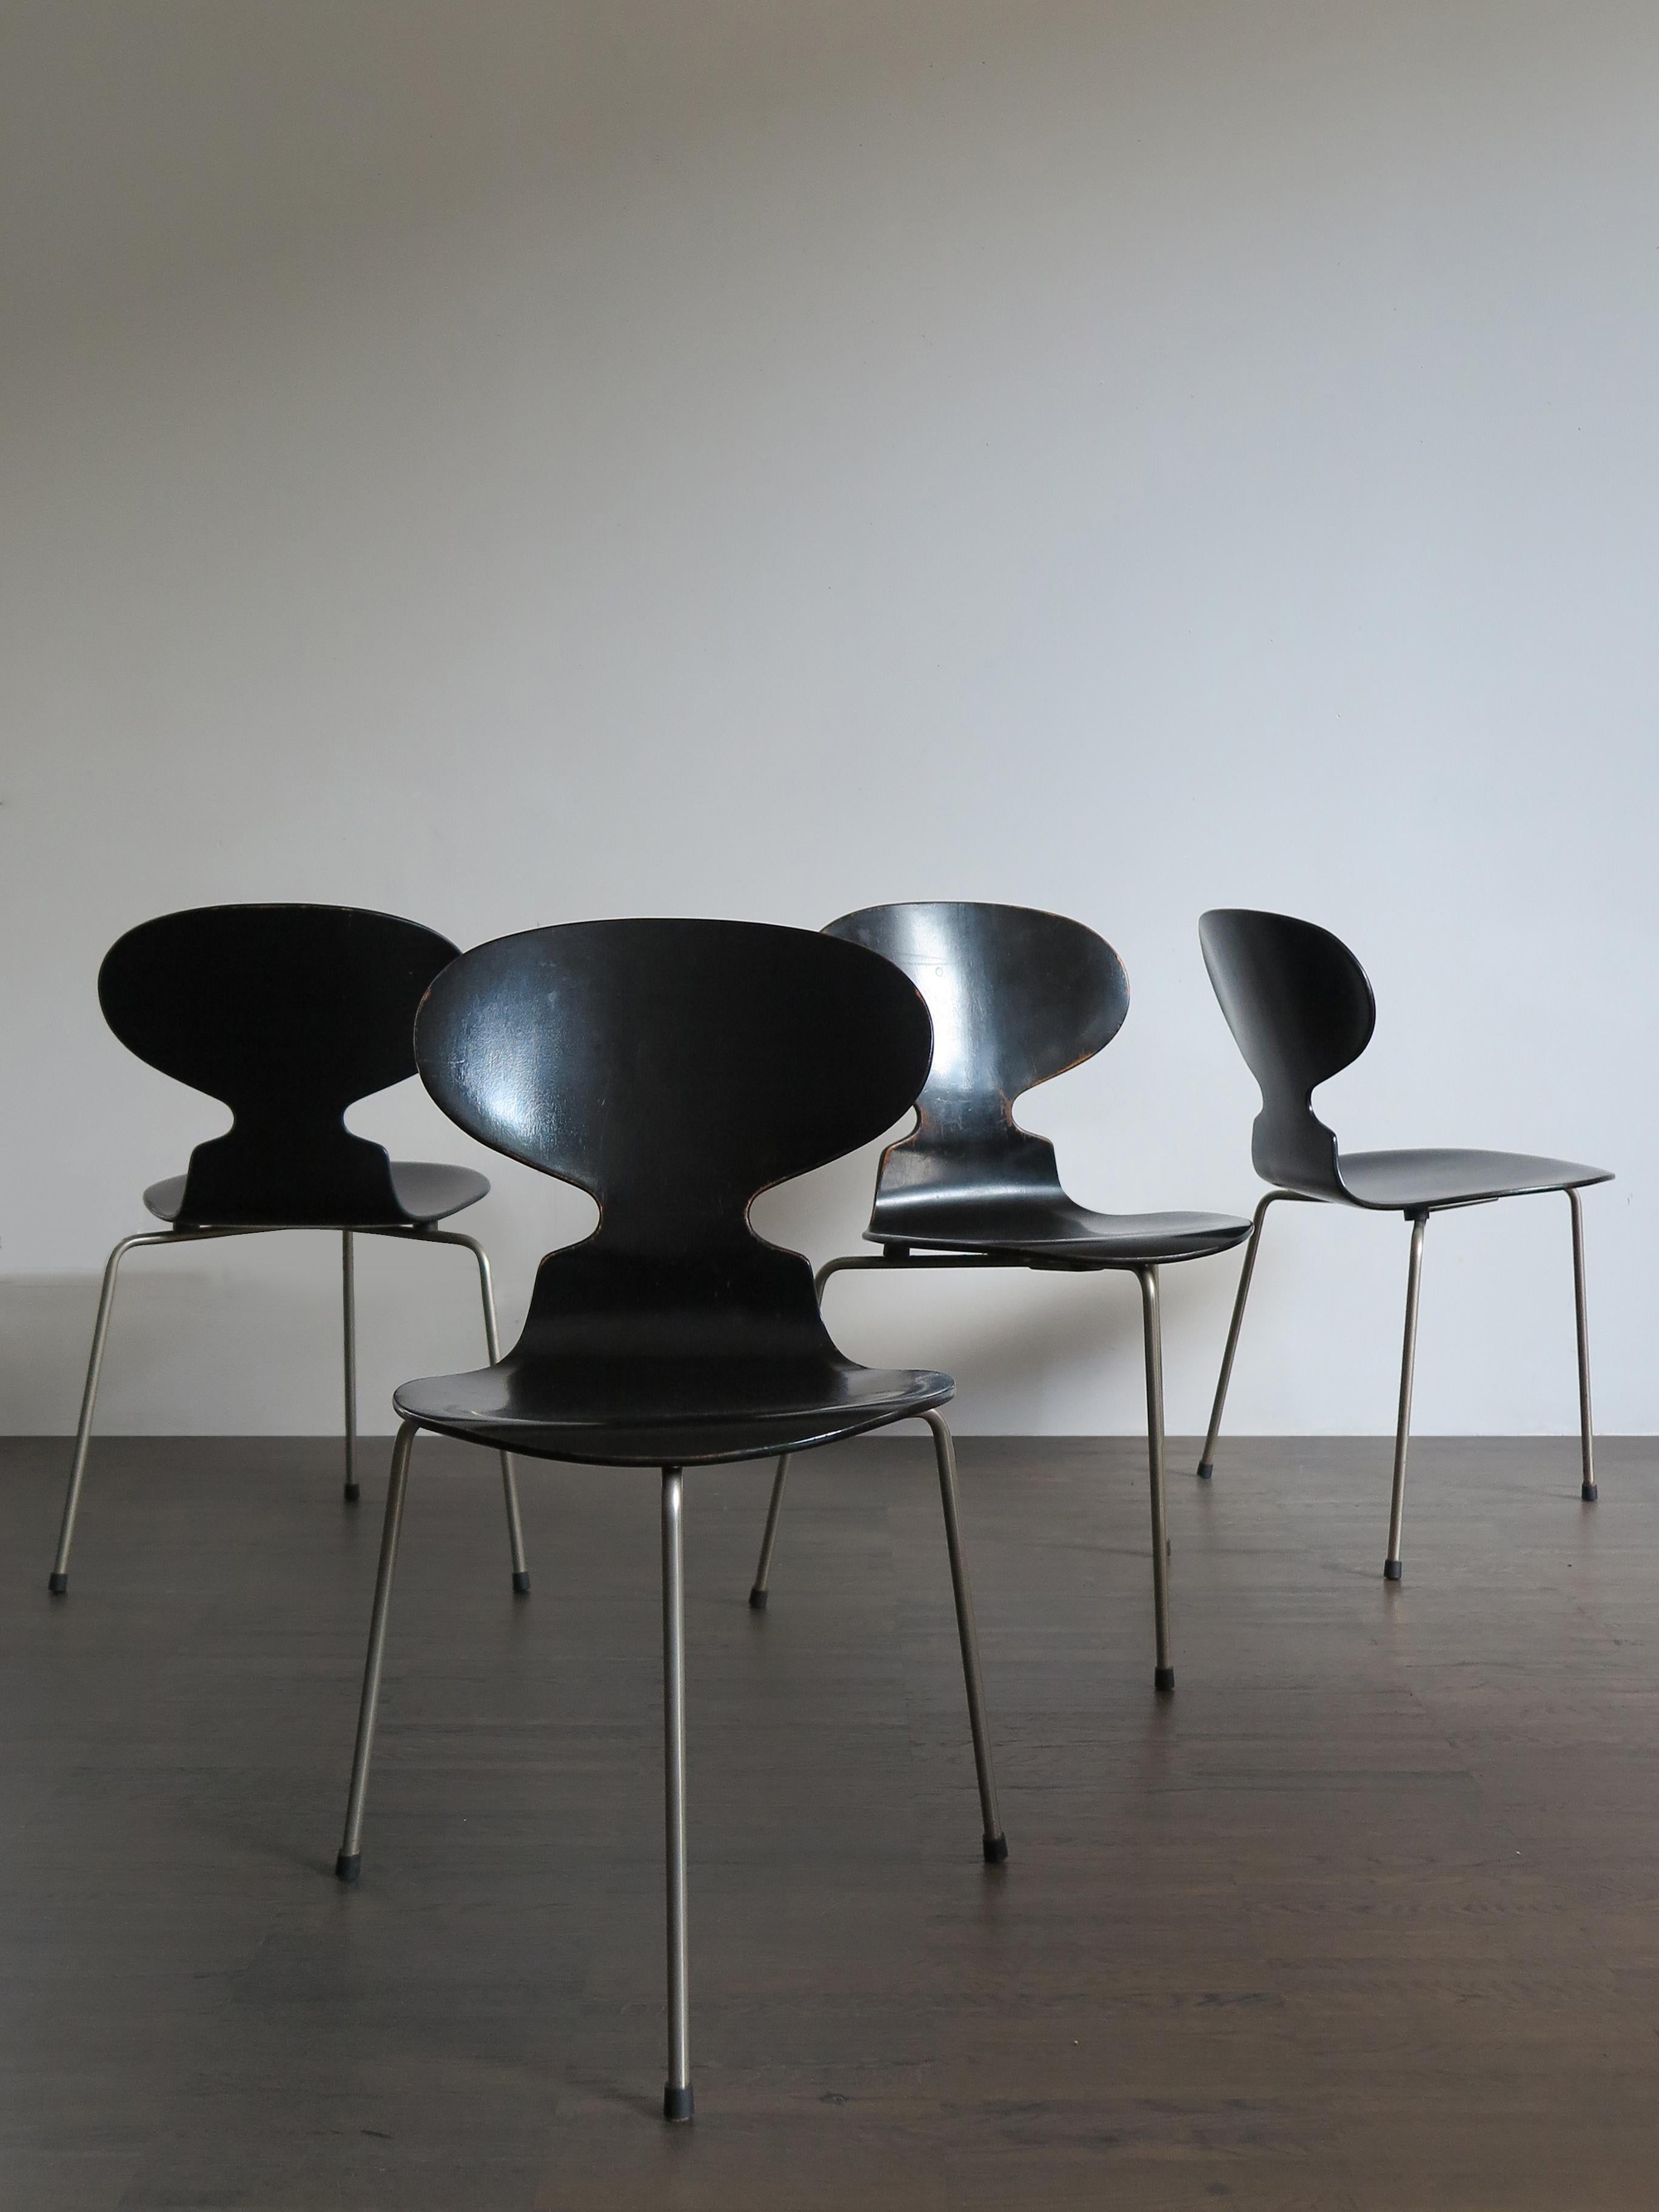 Mid-Century Modern design Scandinavian dining chairs model Ant designed by Danish famous designer Arne Jacobsen for Fritz Hansen, first edition of the 1950s.

Please note that the chairs are original of the period and this shows normal signs of